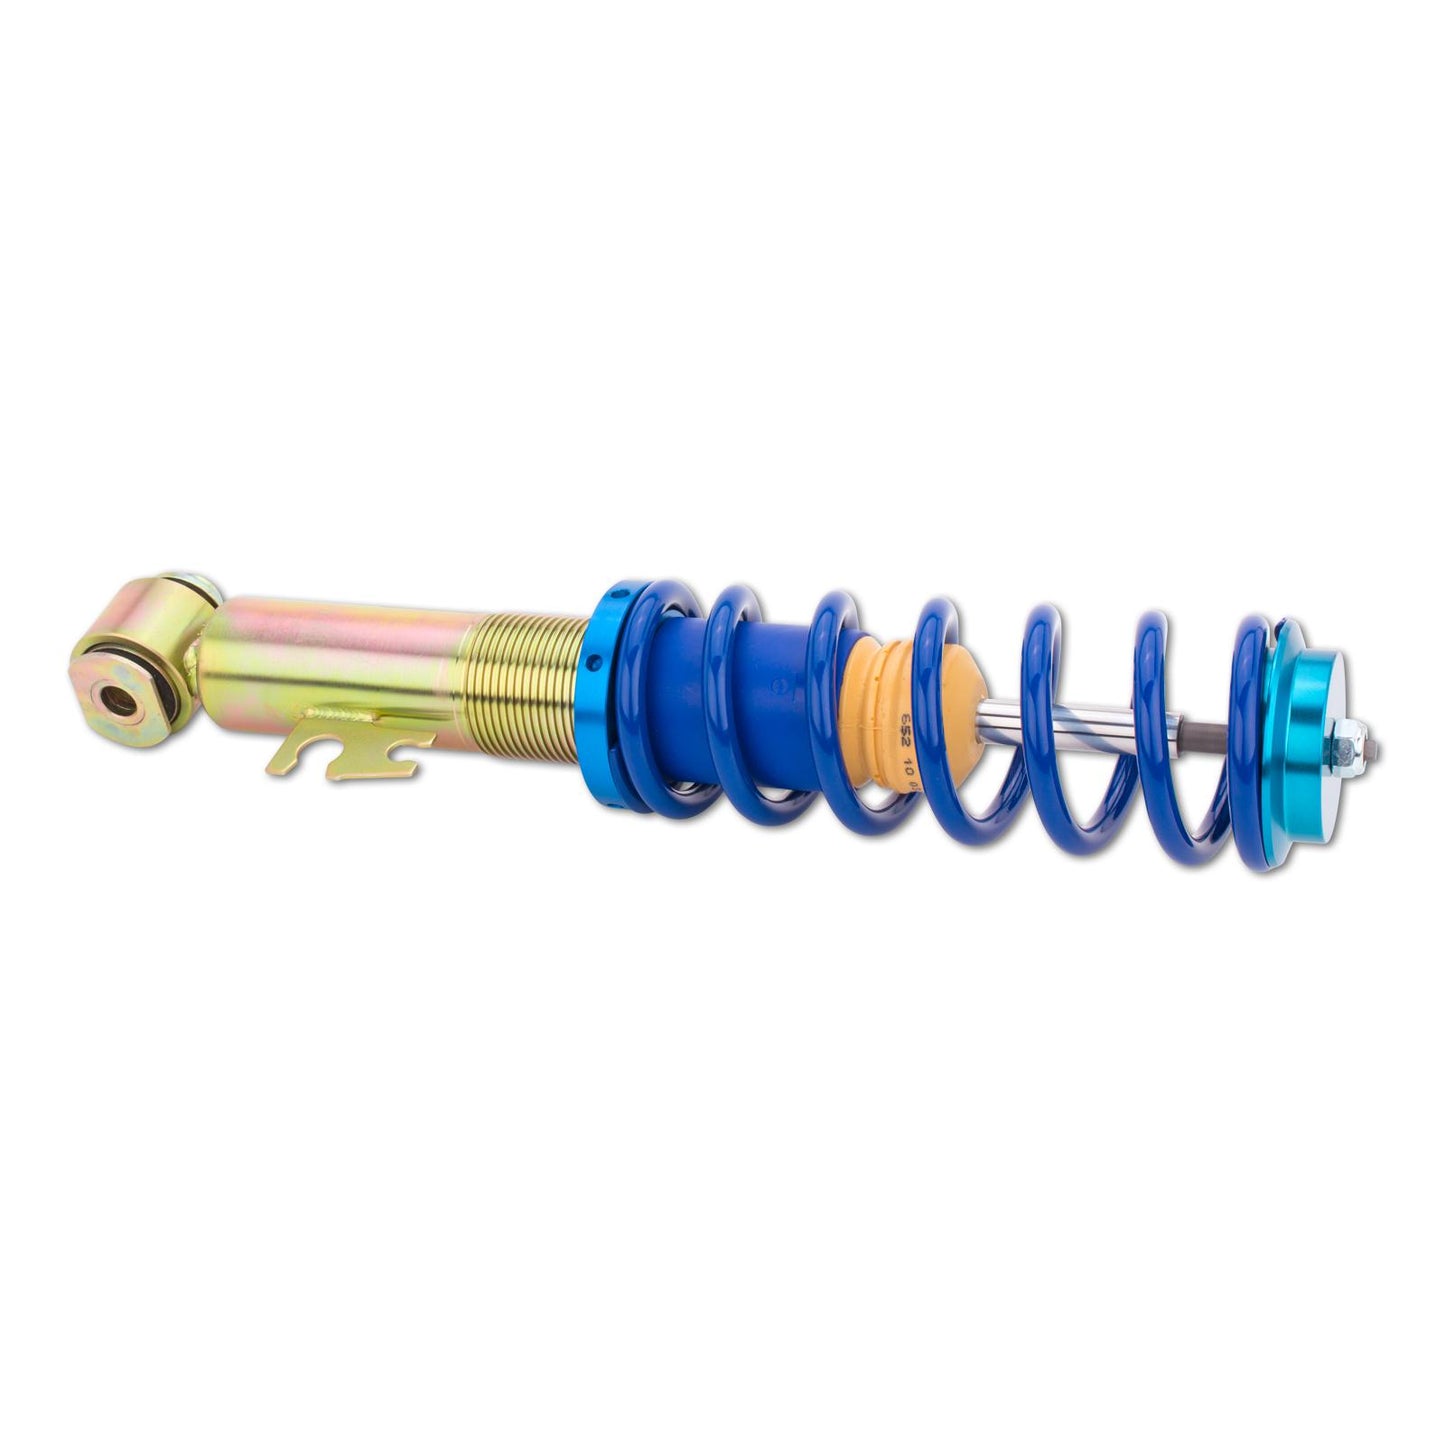 Coilover AP Ford Focus III- (DYB)-SUSPENSIONES COILOVER-ICCTUNING